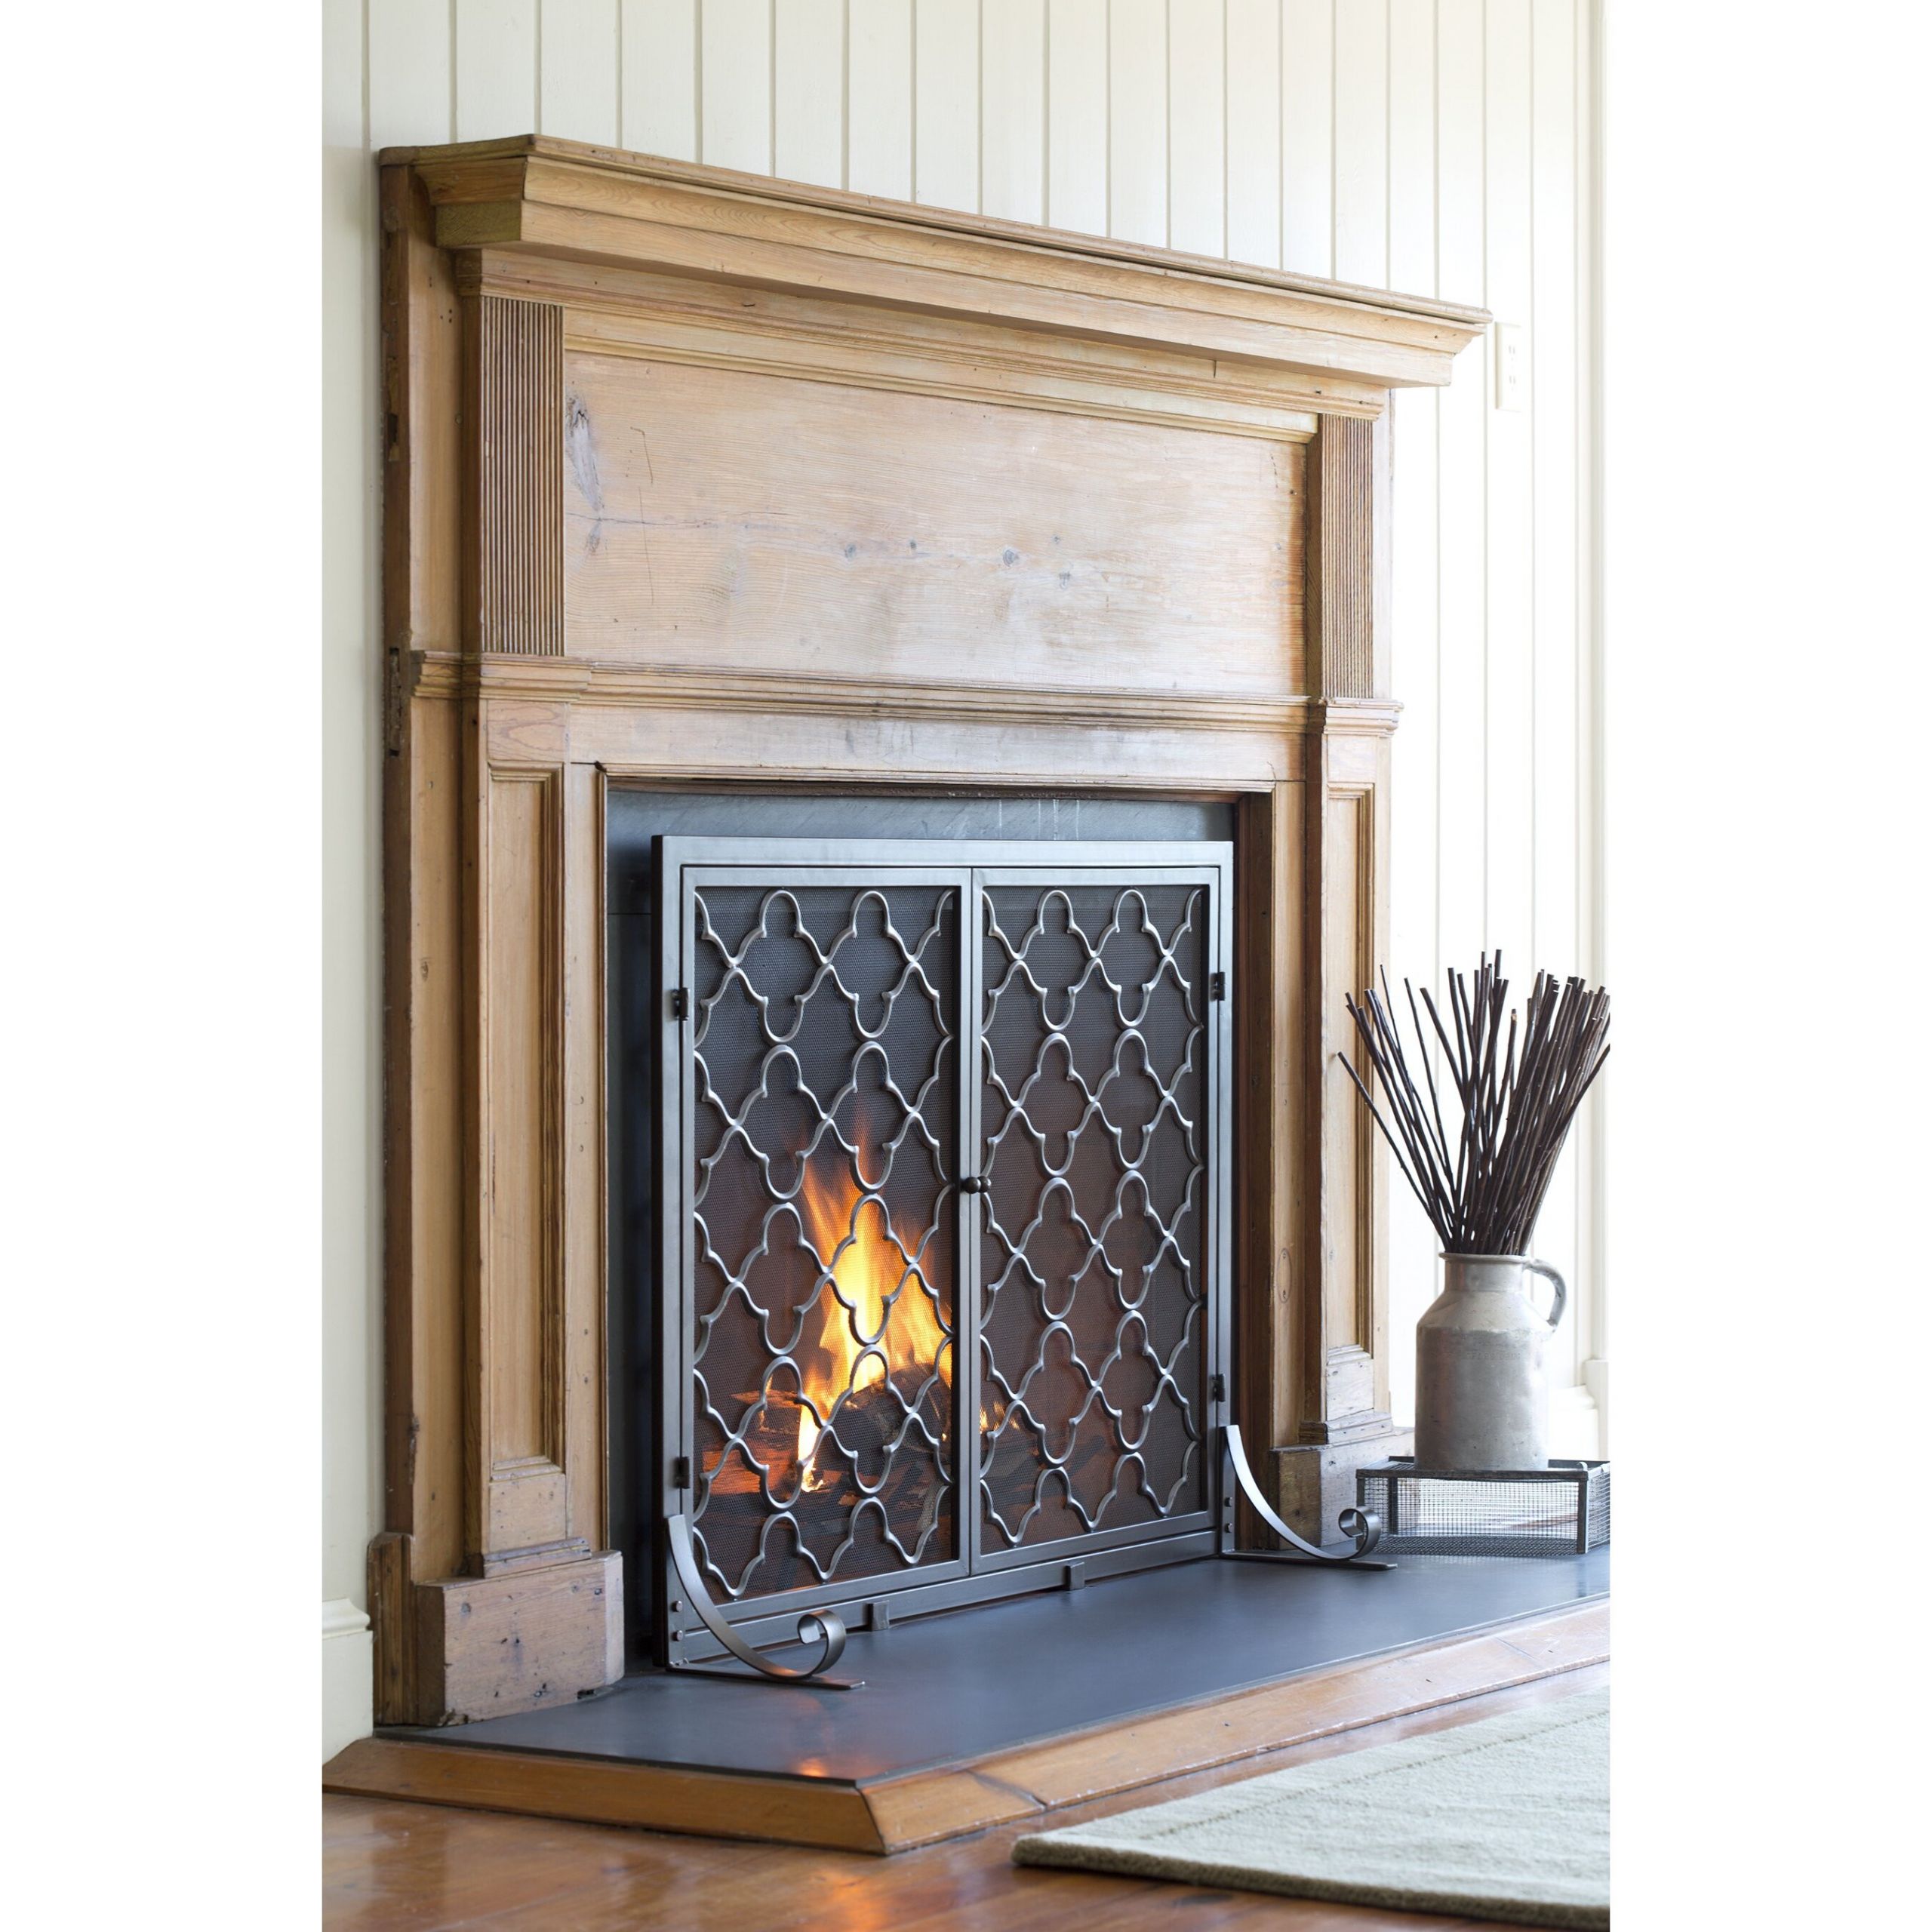 Plow And Hearth Electric Fireplace
 Plow & Hearth 1 Panel Geometric Fireplace Screen & Reviews